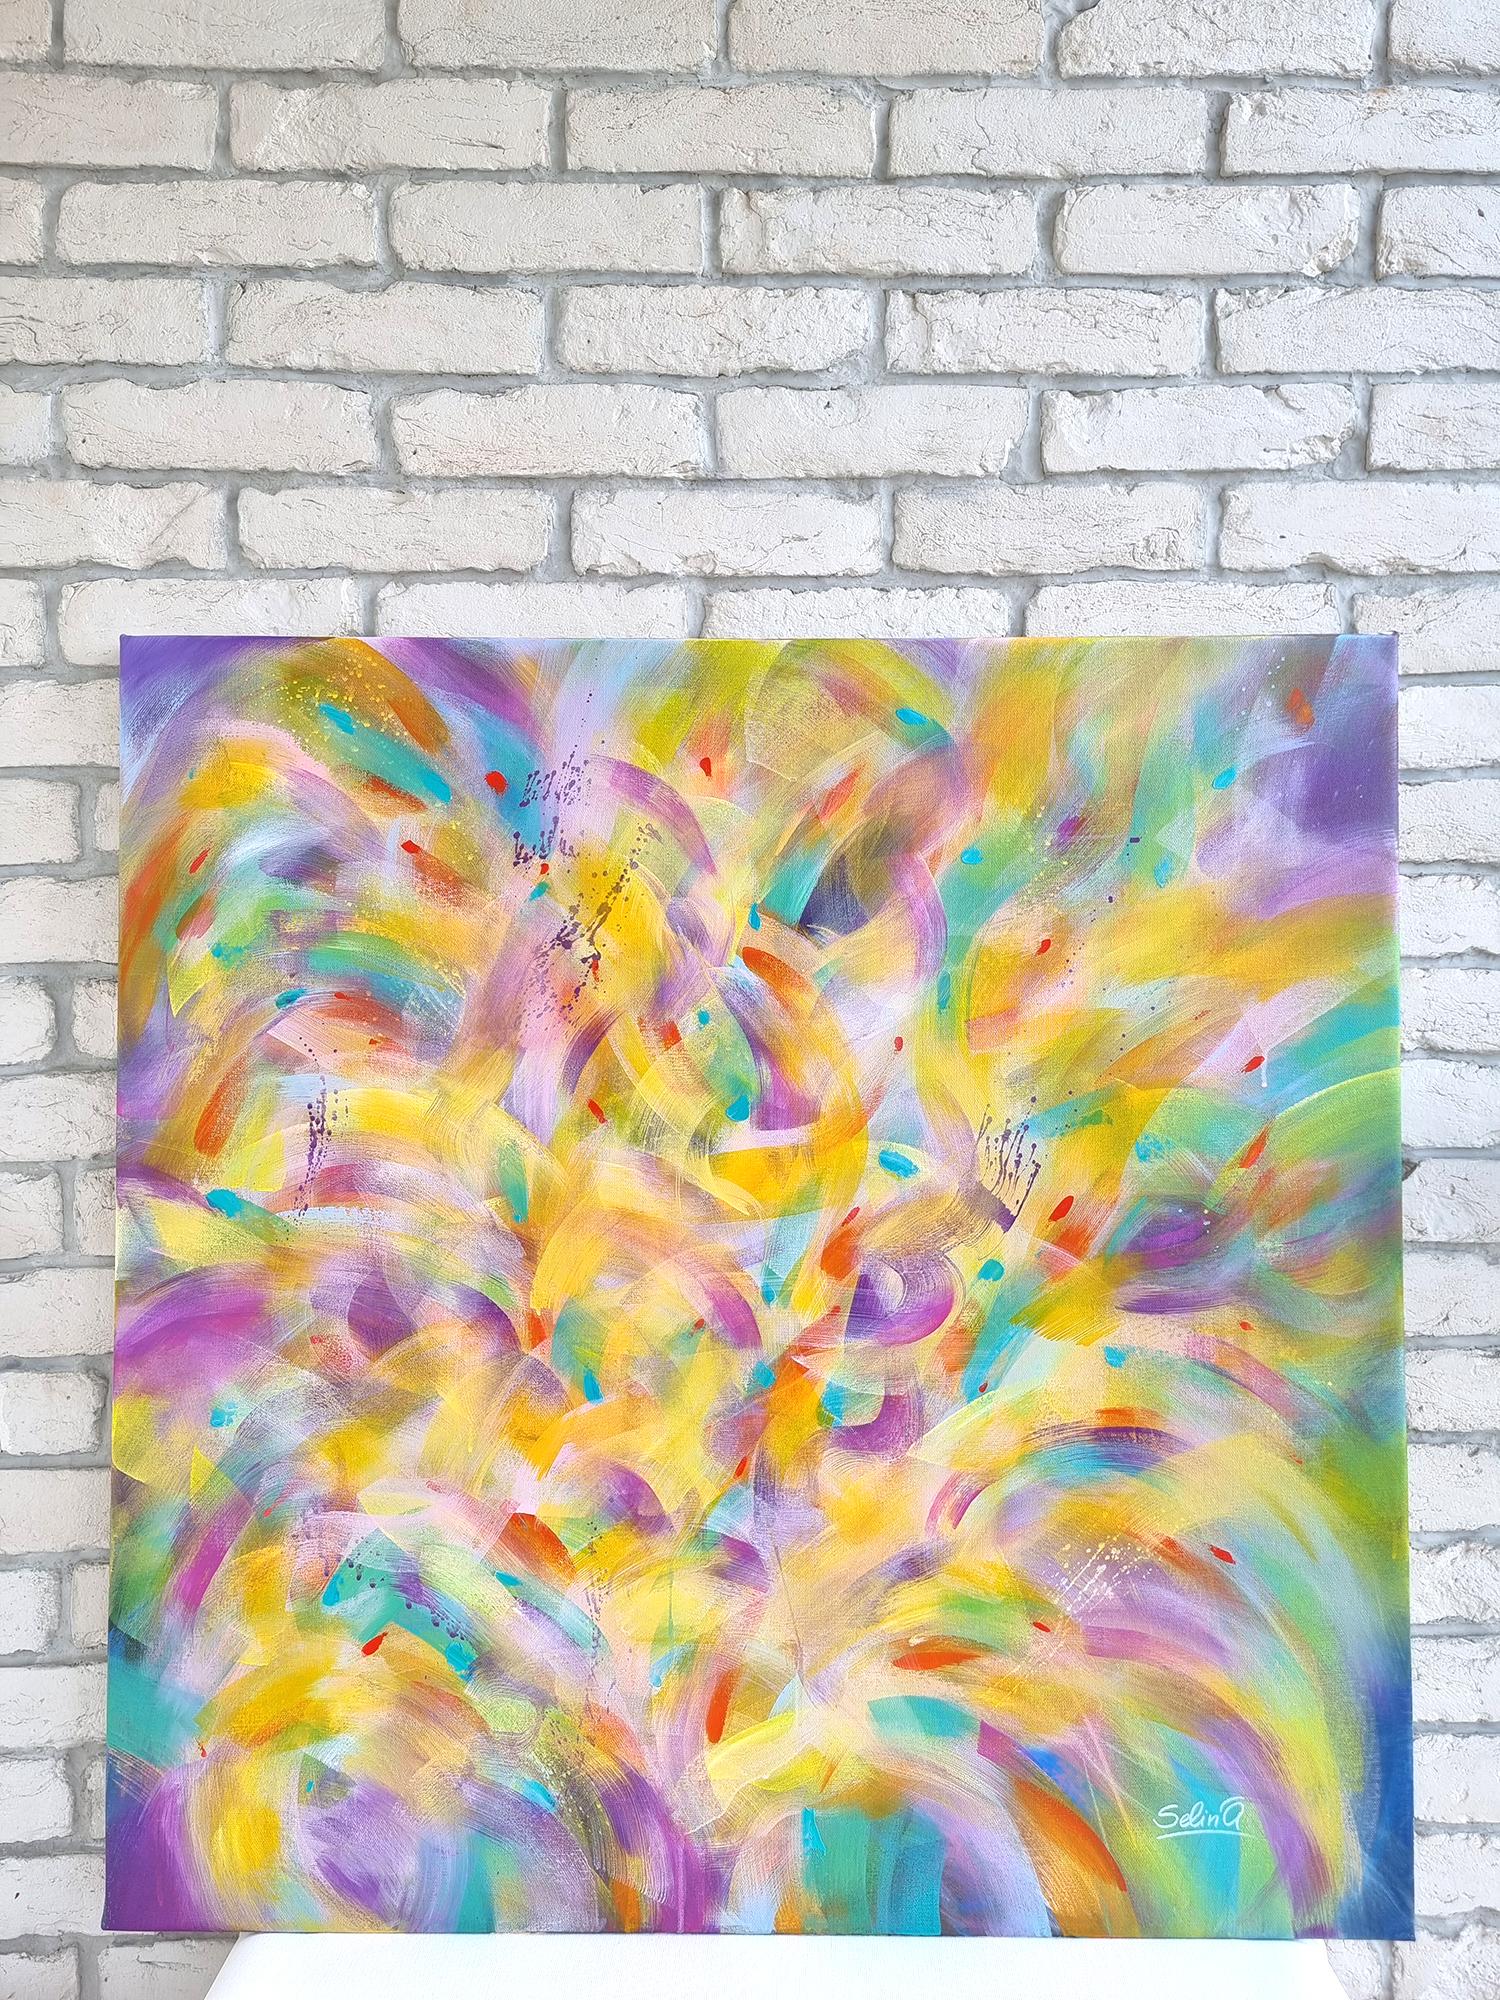 Spring light, Modern Colorful Abstract Painting 100x100cm by Anna Selina 2